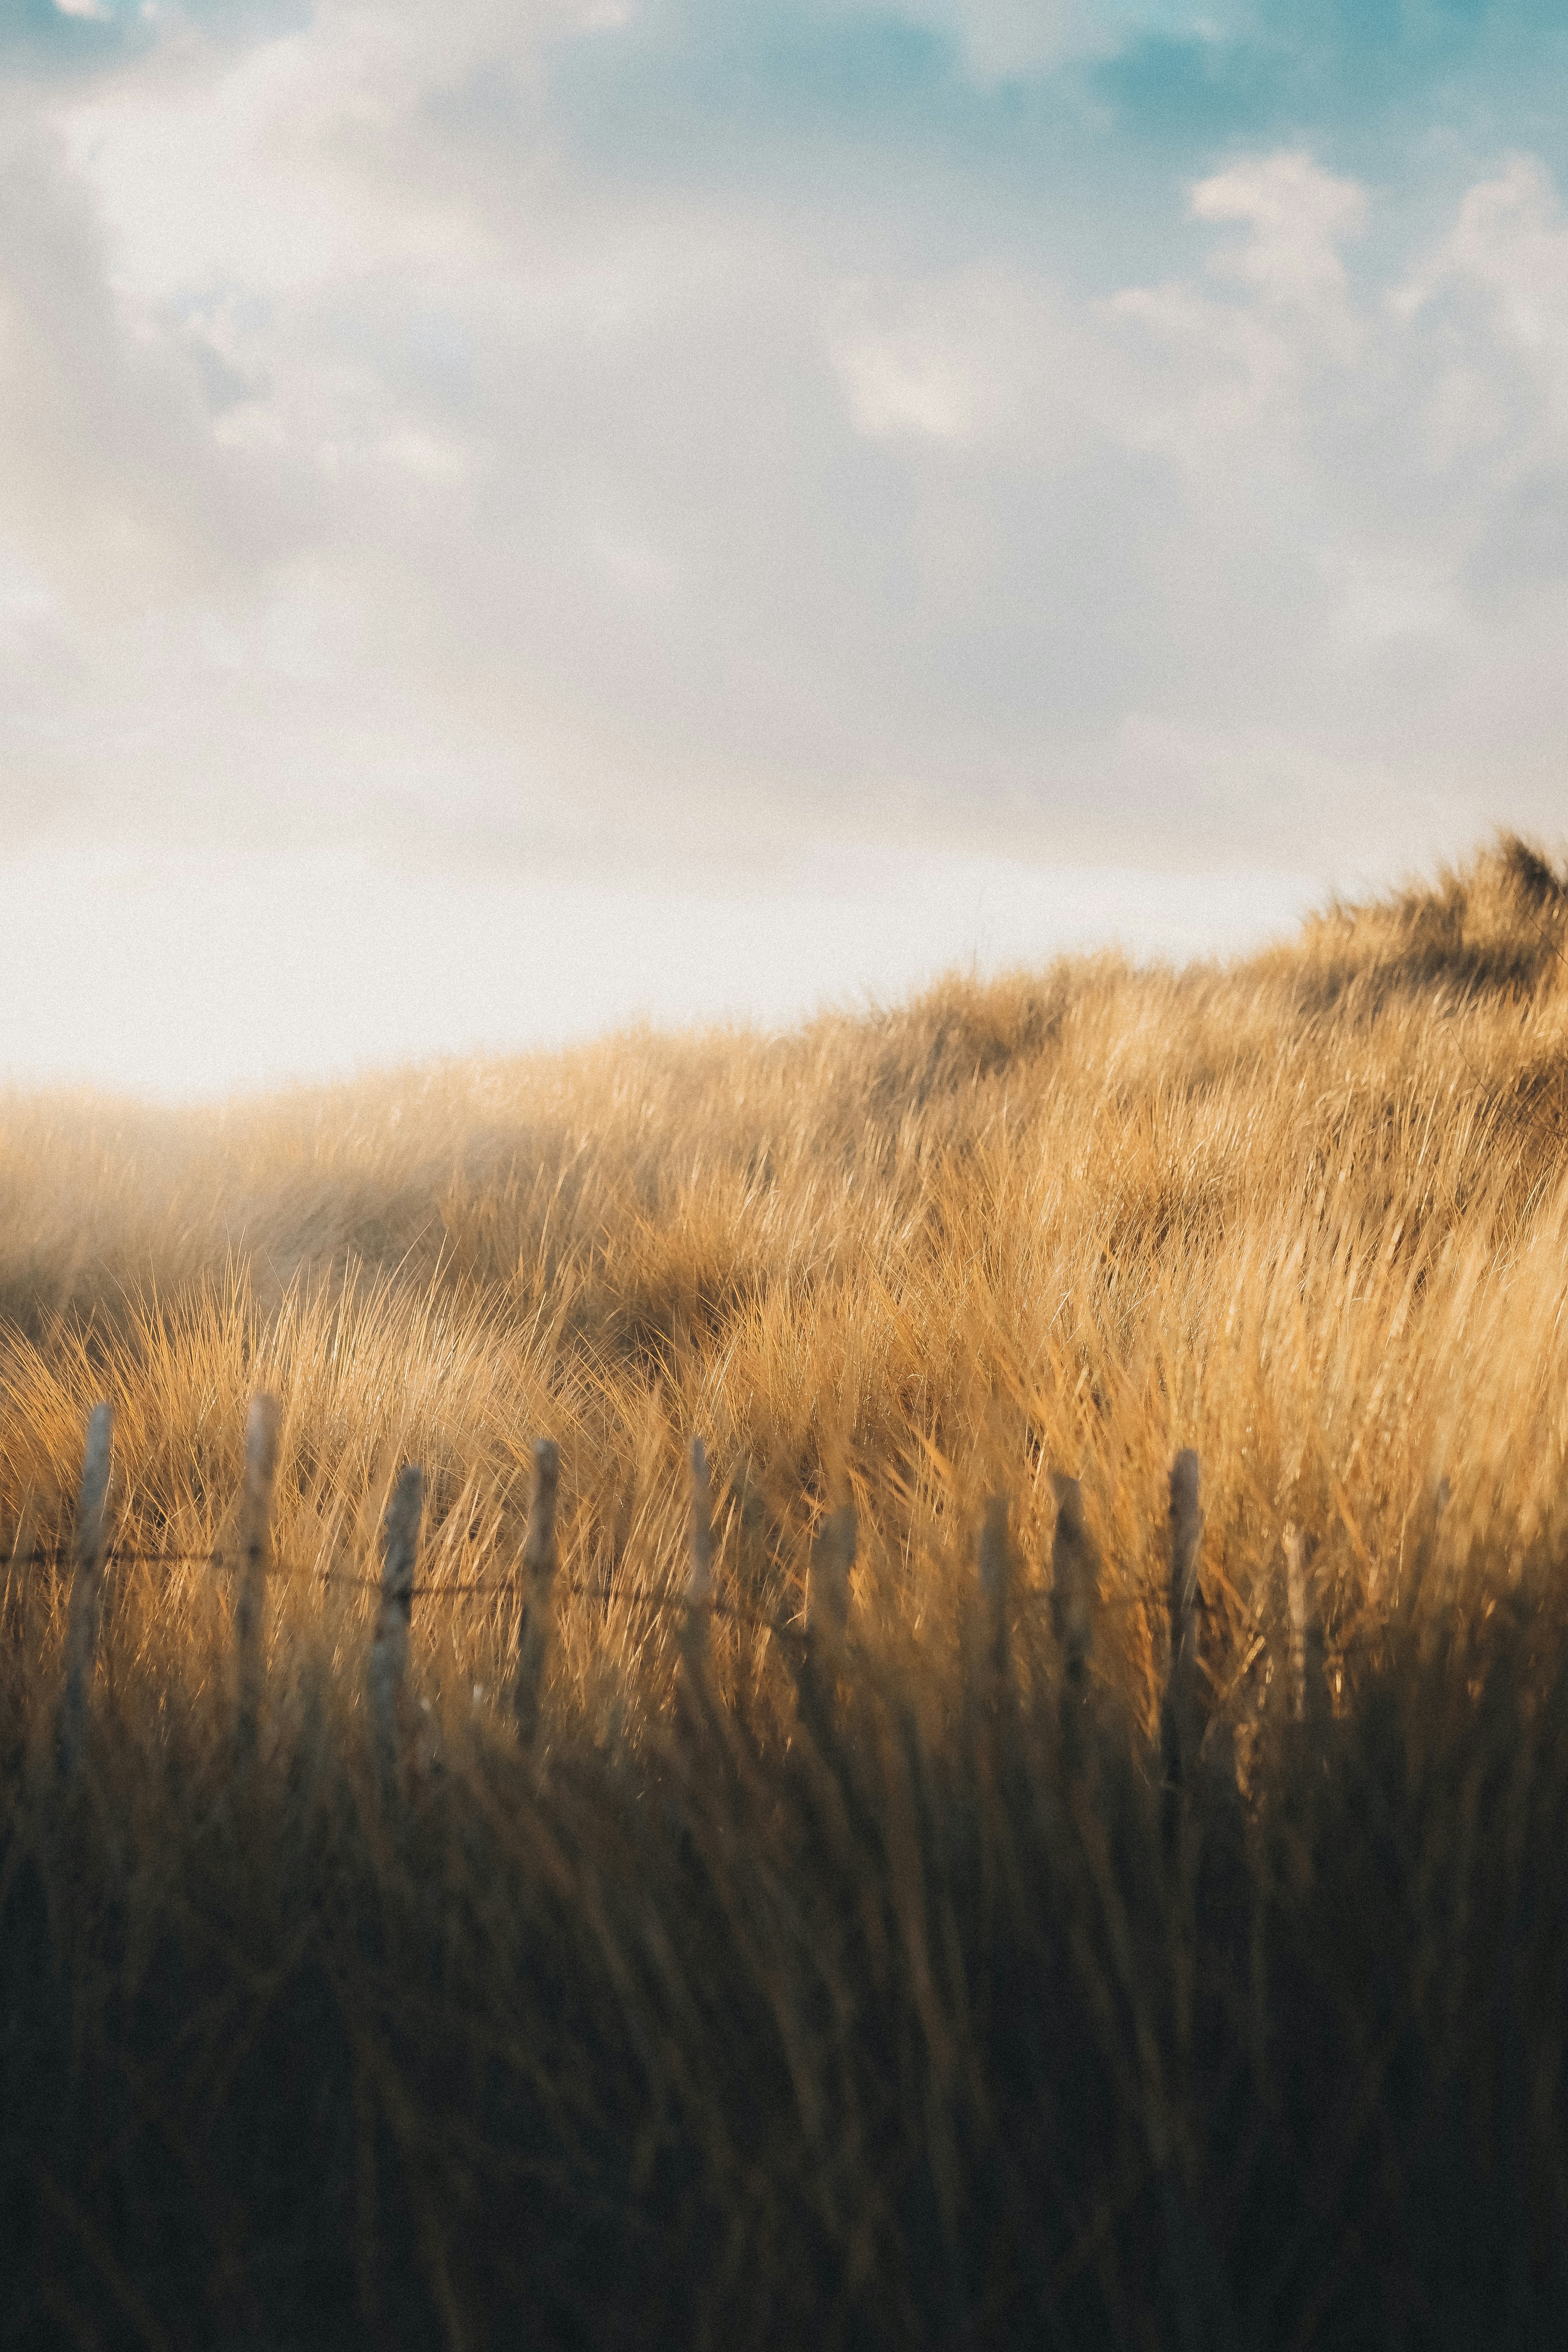 Choose from a curated selection of grass backgrounds. Always free on Unsplash.